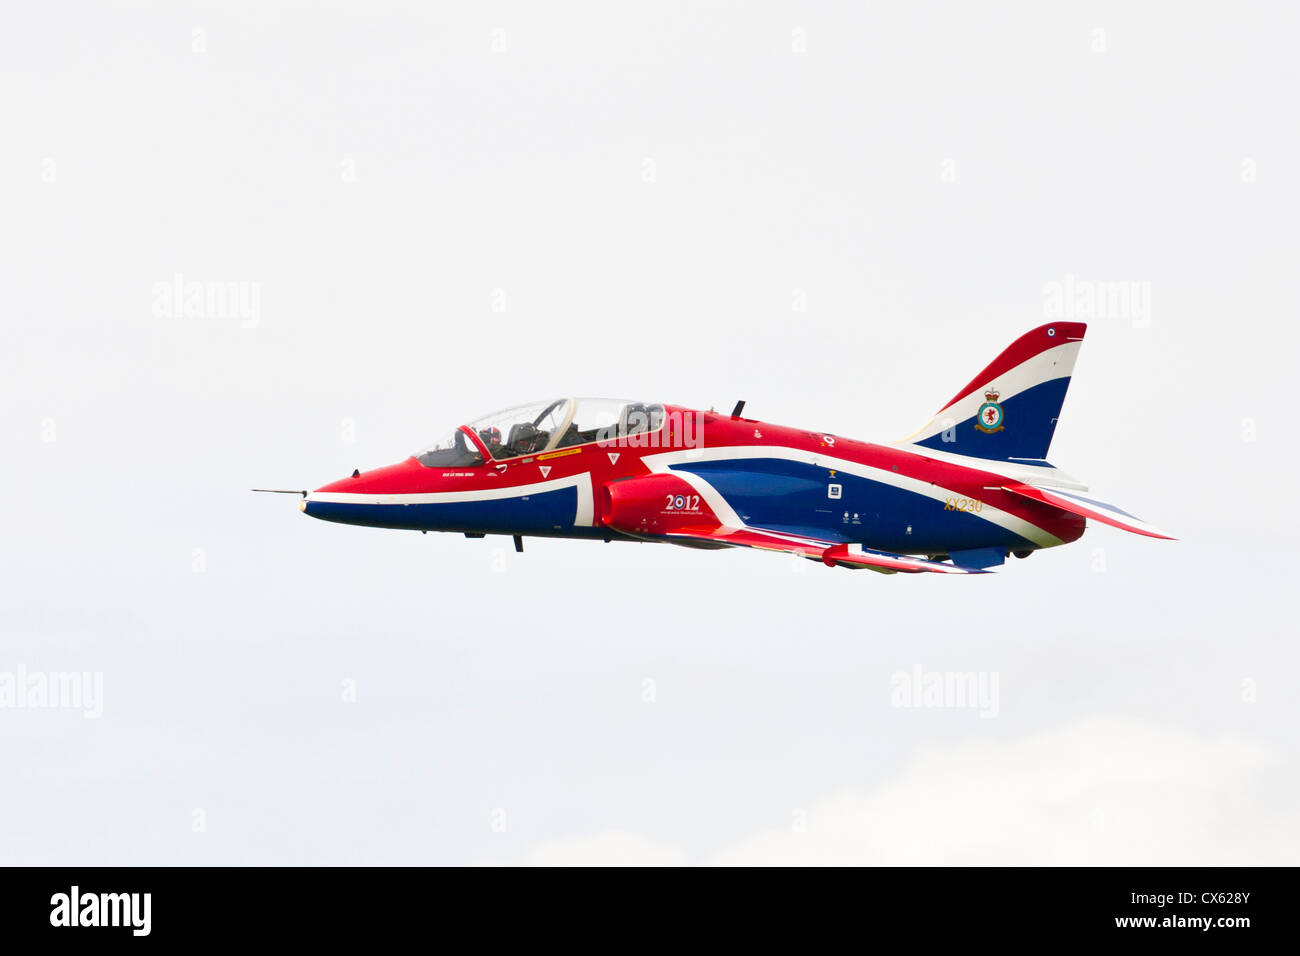 Red Arrows Hawk aircraft in RAF Benevolent Fund colours at Best of British Show, Cotswold (Kemble EGBP) Airport. JMH6093 Stock Photo